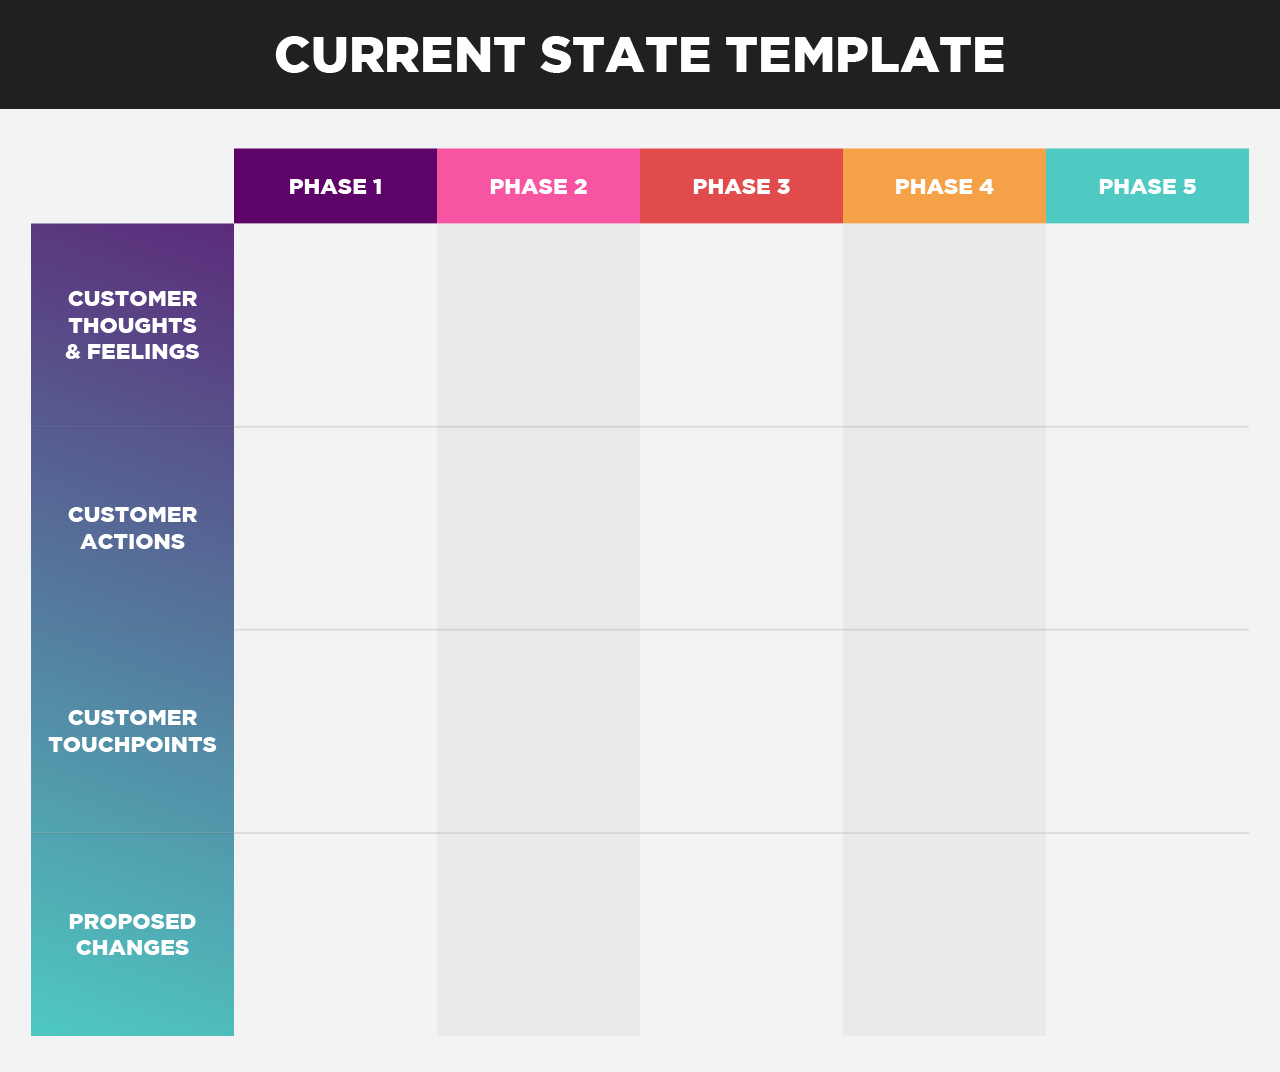 Current state customer journey map templates